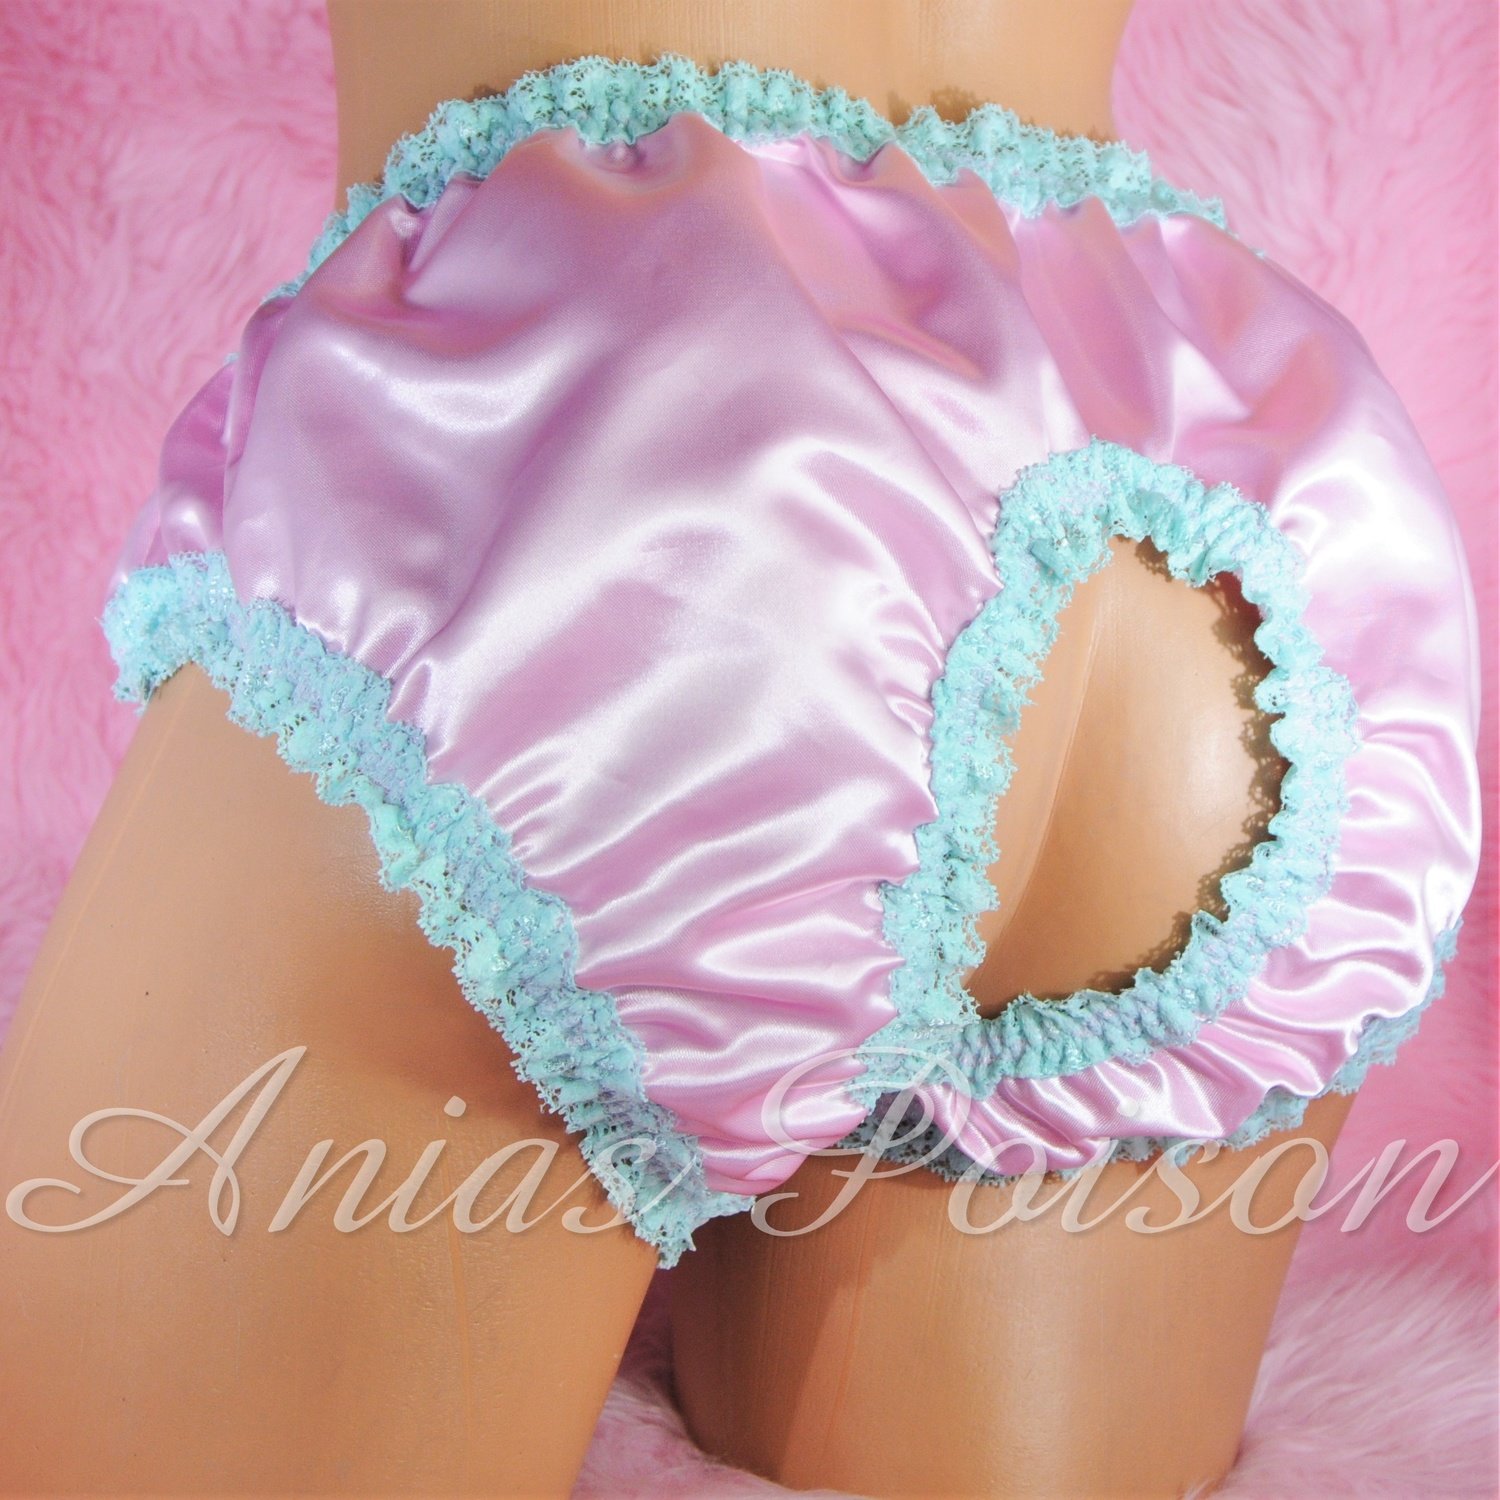 Anias Poison MANties satin high cut super Shiny crotchless sissy humiliation lace maid panties